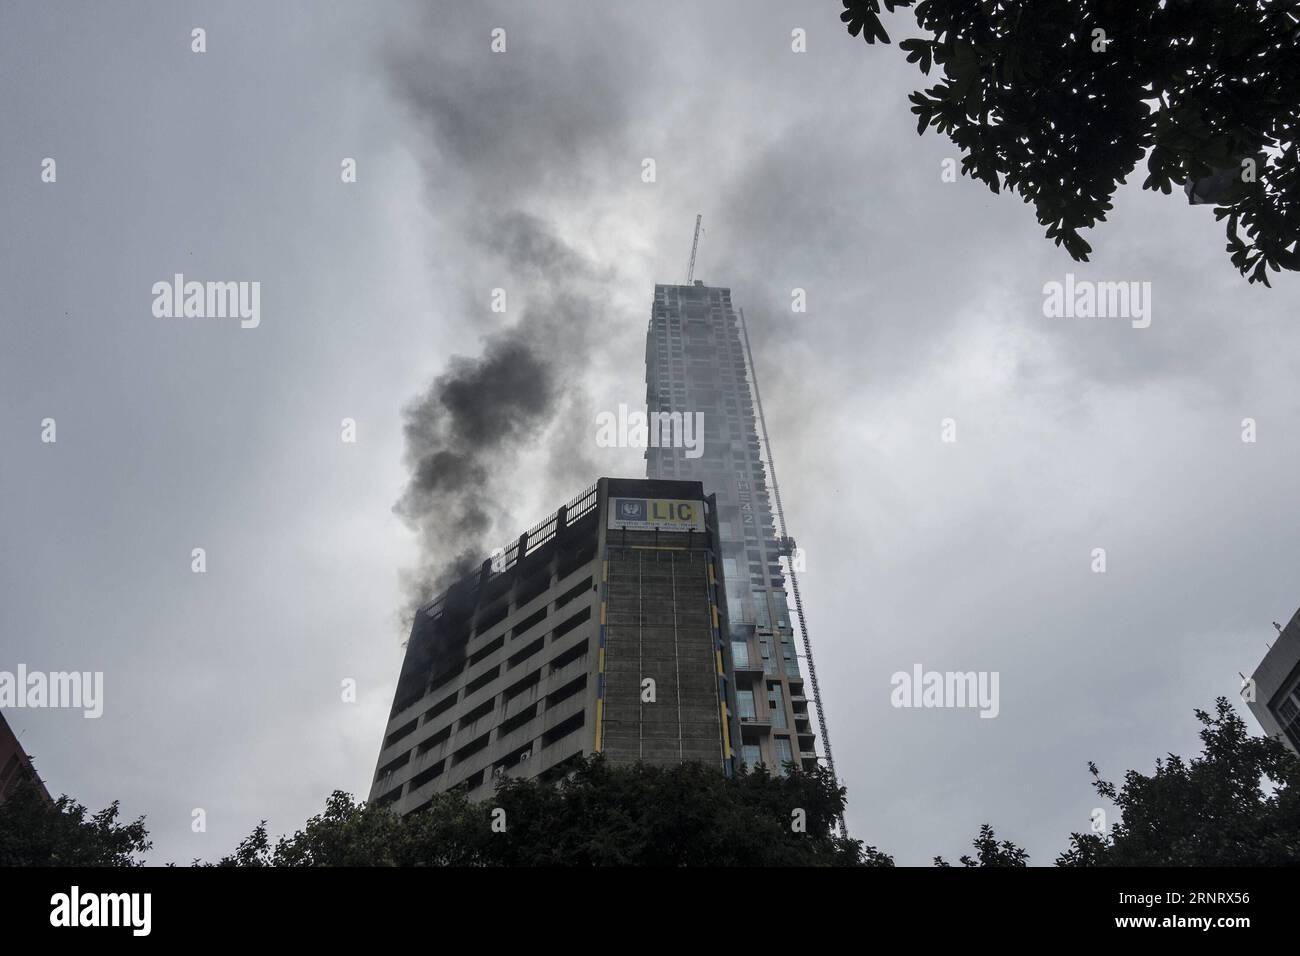 (171019) -- KOLKATA, Oct. 19, 2017 -- Smoke rises from a commercial building where a fire brke out in central Kolkata, India, Oct. 19, 2017. A major fire broke out at a highrise office building in the eastern Indian city of Kolkata on Thursday, officials said. ) (srb) INDIA-KOLKATA-FIRE ACCIDENT TumpaxMondal PUBLICATIONxNOTxINxCHN Stock Photo